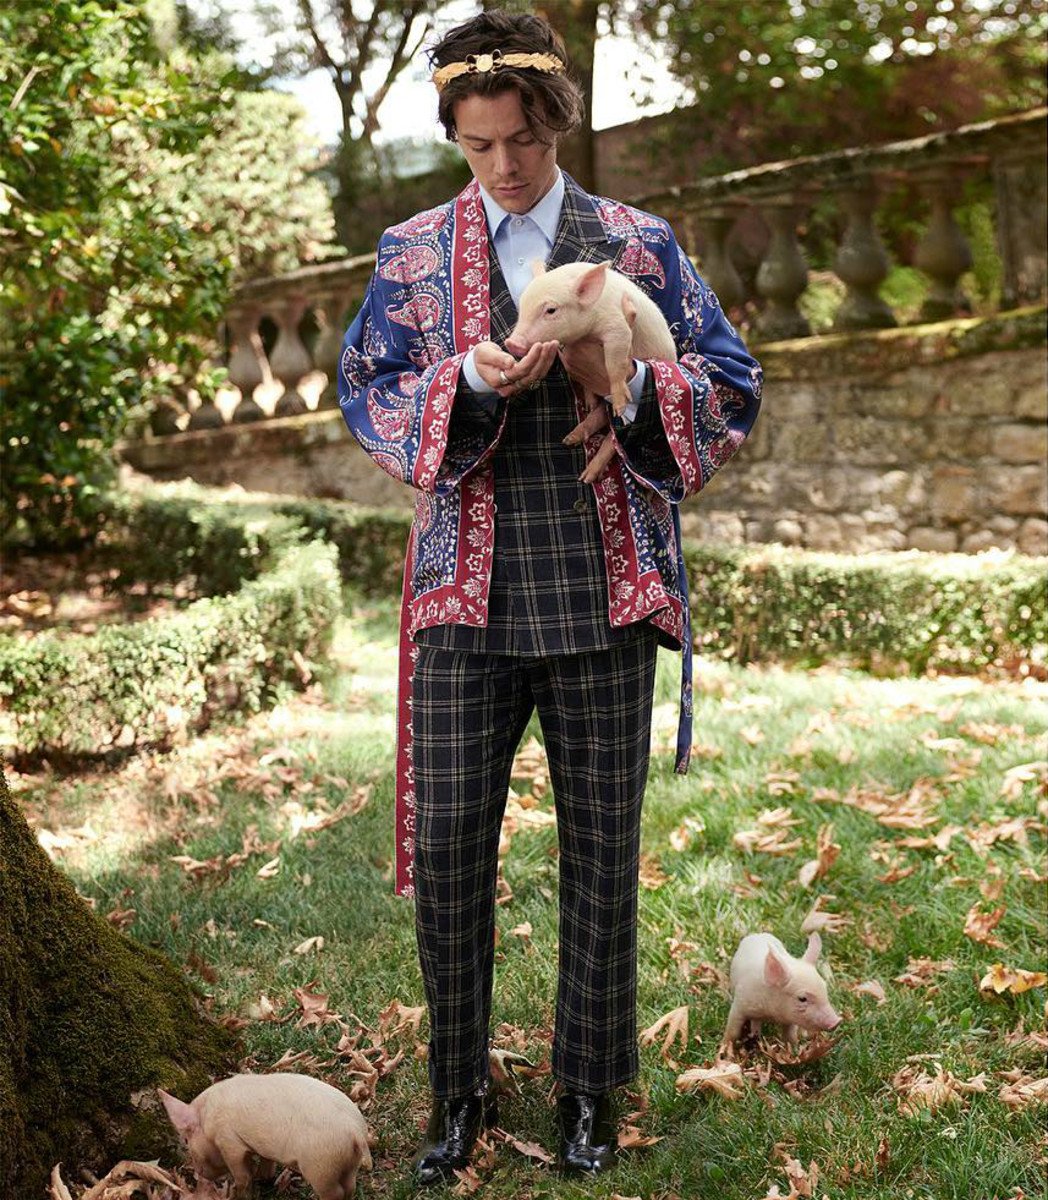 Harry Styles for Gucci Cruise 2019 Campaign